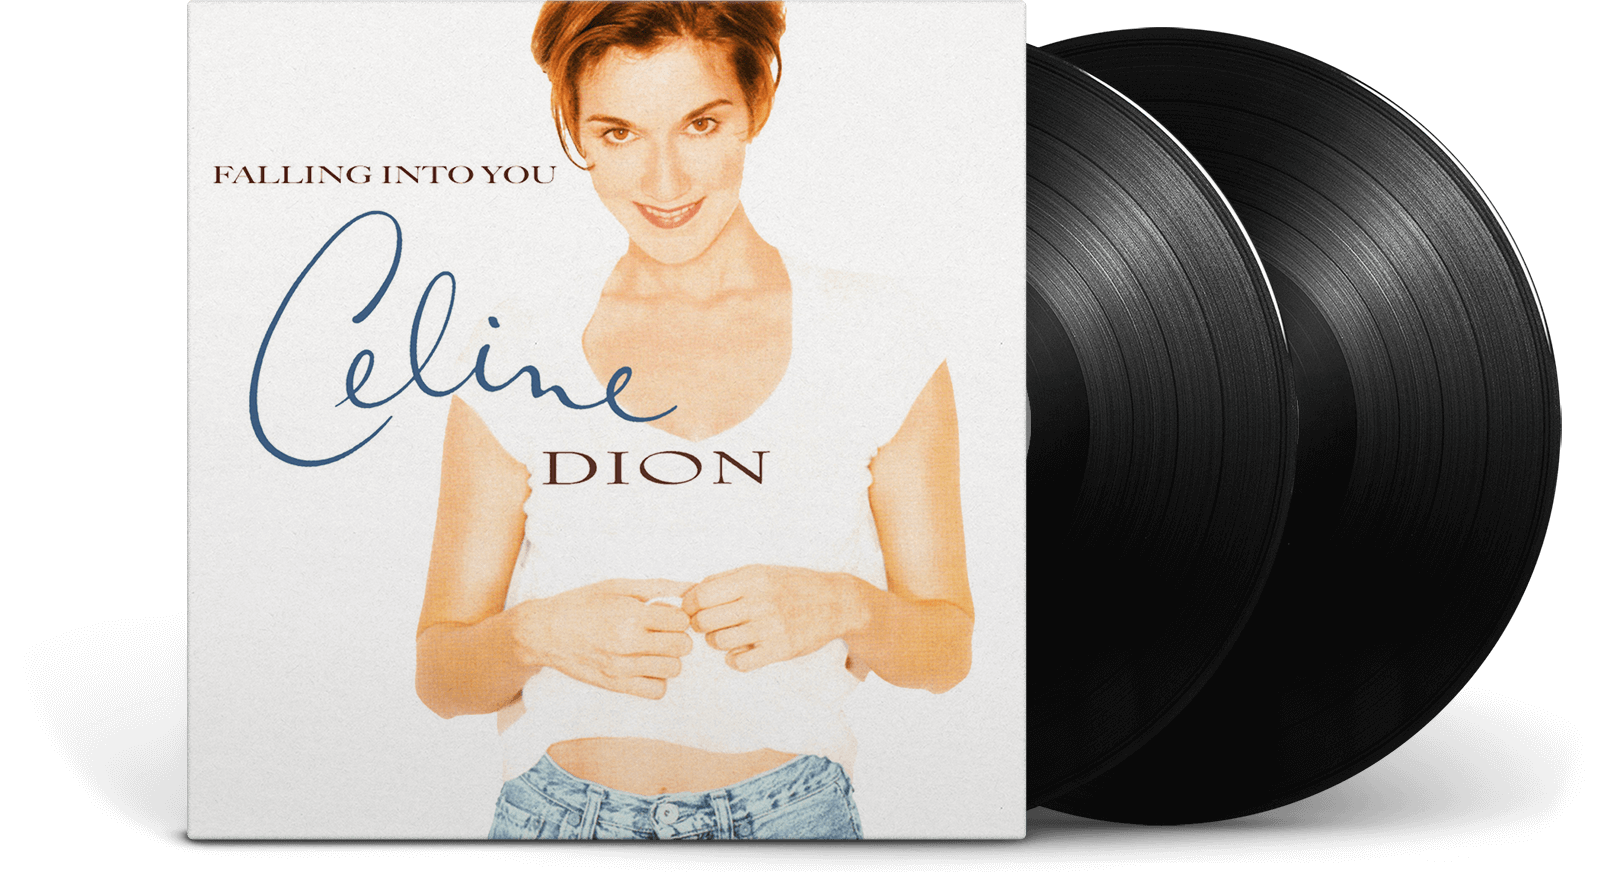 Vinyl   Celine Dion   Falling Into You   The Record Hub